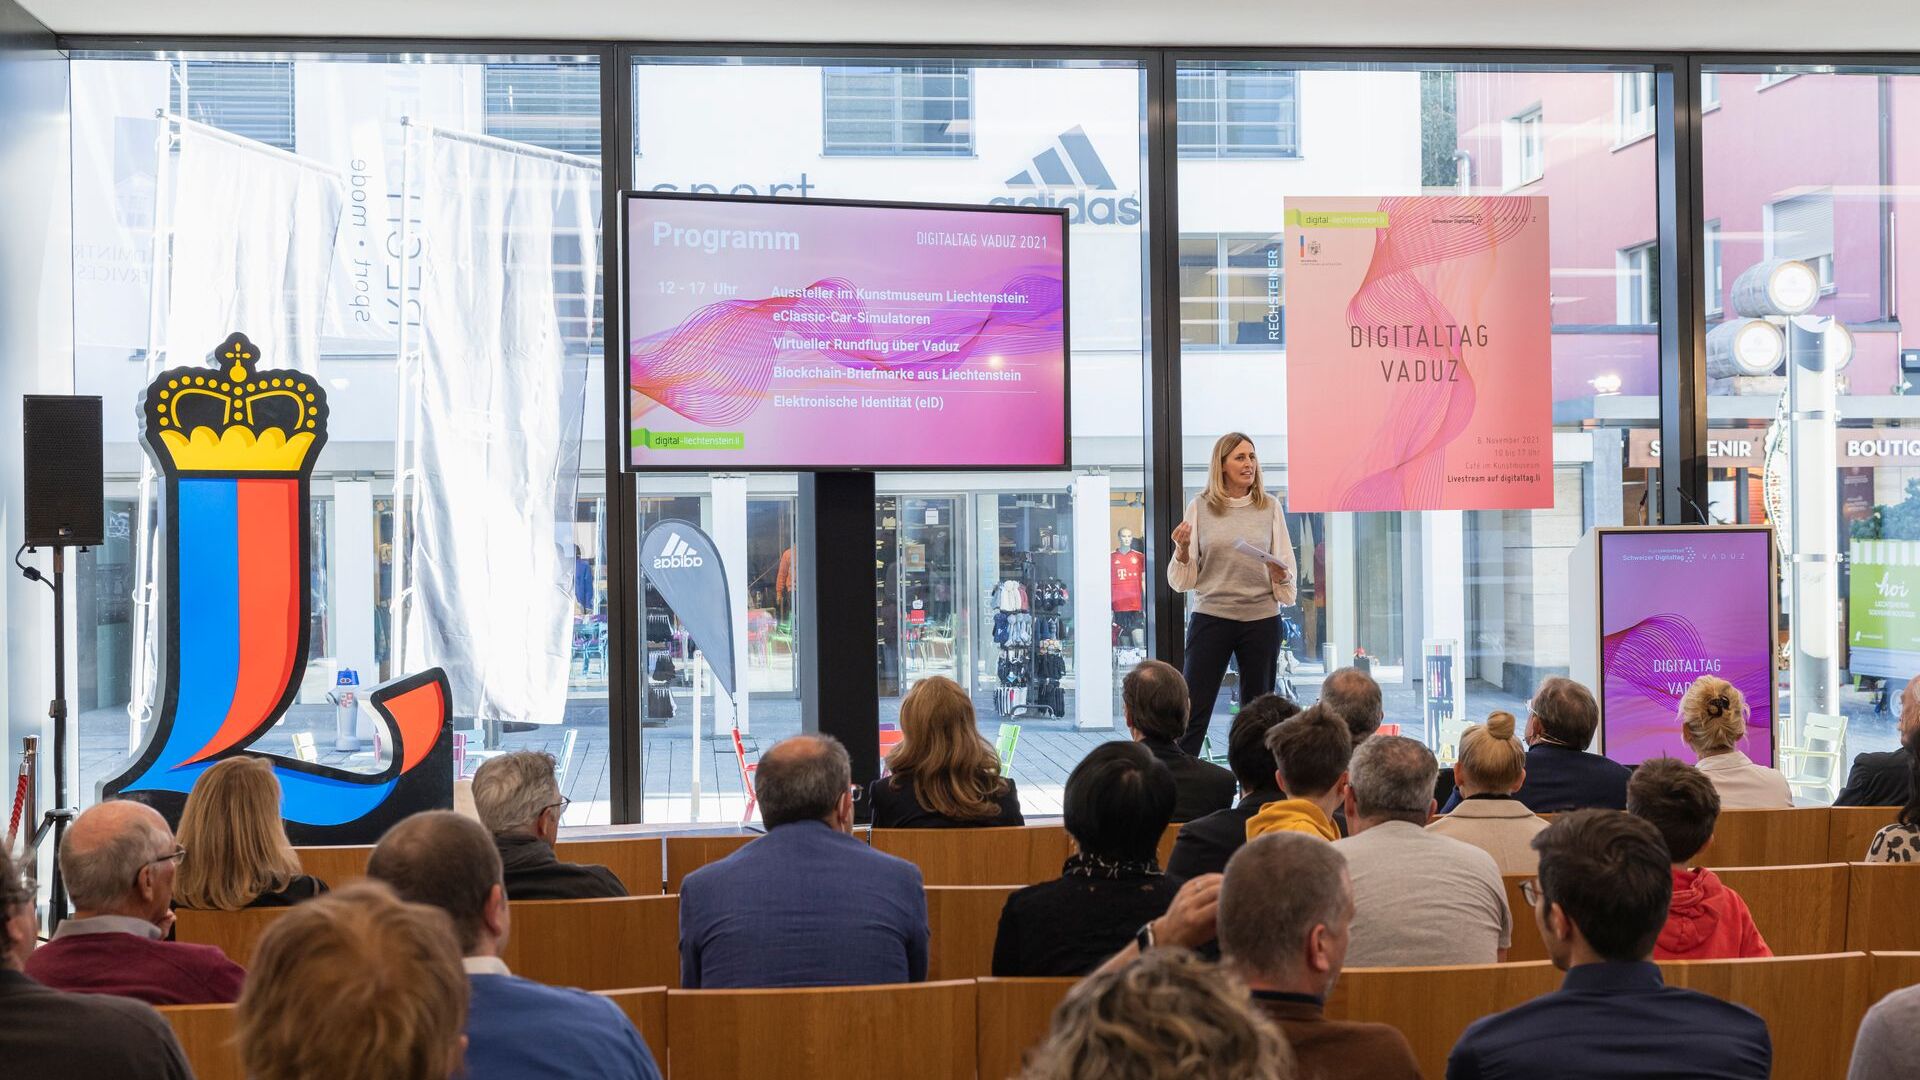 The "Digitaltag Vaduz", welcomed by the Kunstmuseum of the capital of the Principality of Liechtenstein on Saturday 6 November 2021, aroused the enthusiasm of the public and speakers in analogy with the "Digital Day Switzerland" of the following day 10